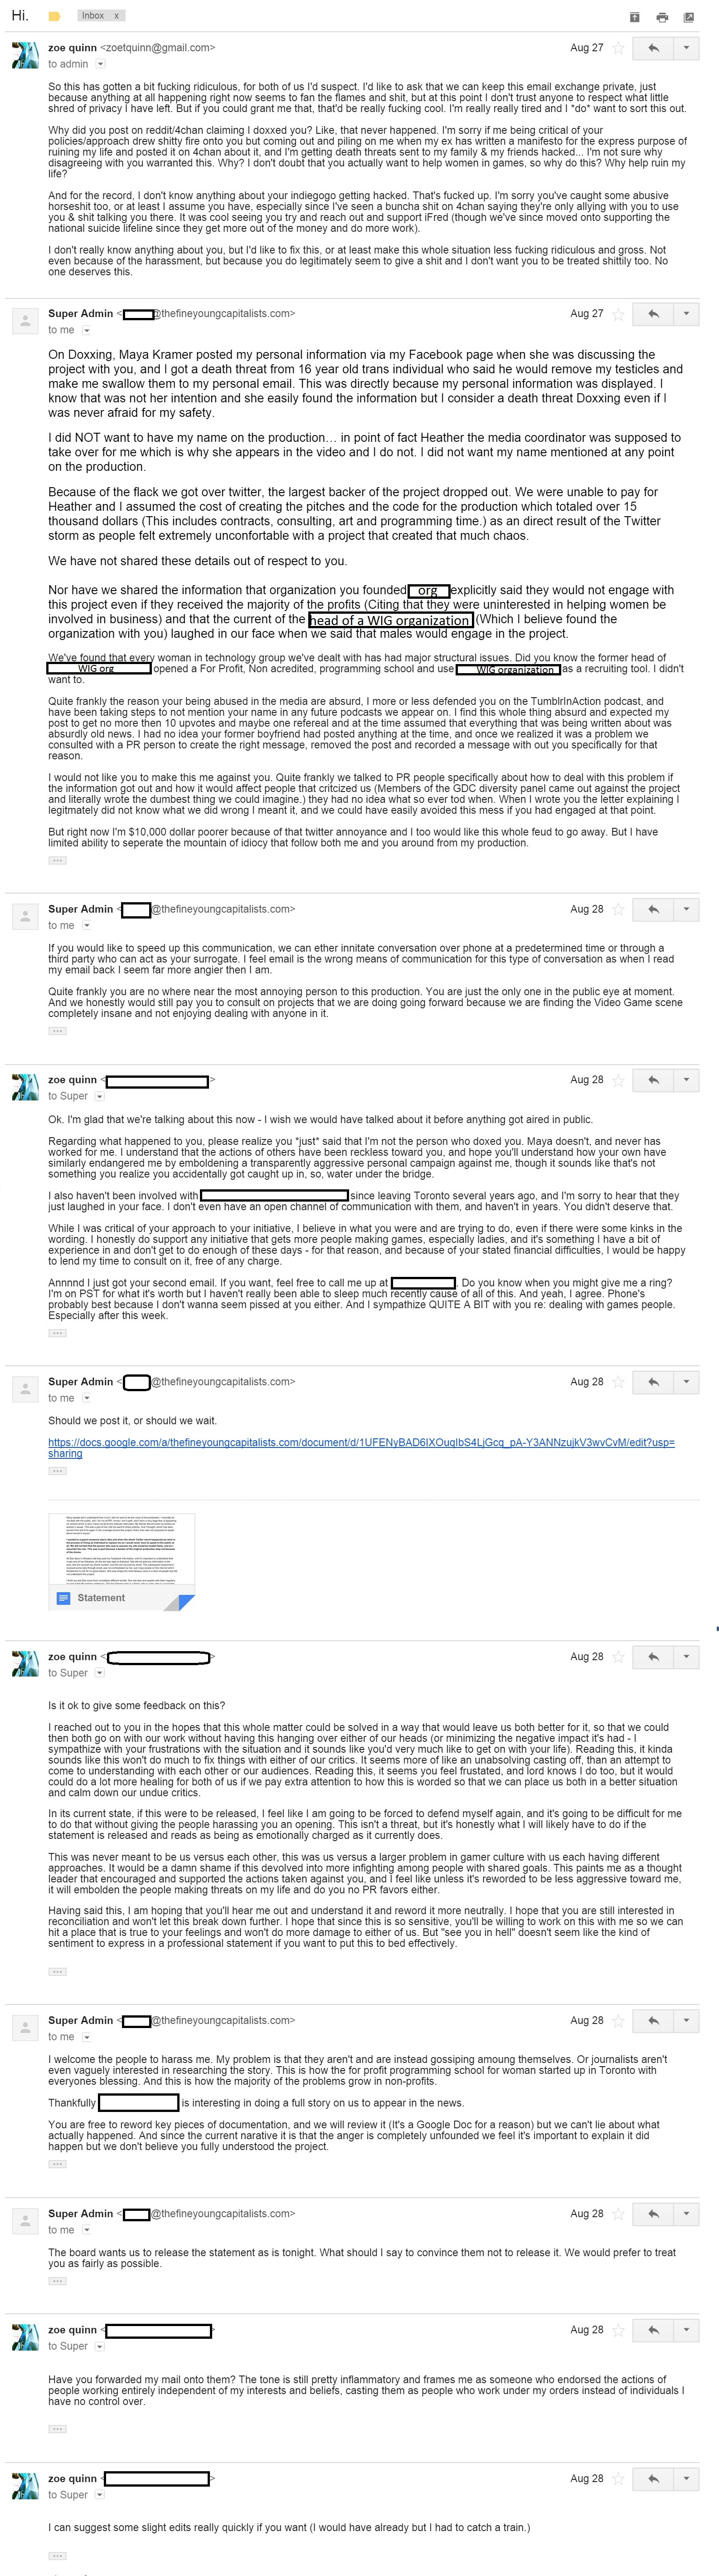 Zoe Quinn/TFYC emails (27–28 August 2014)